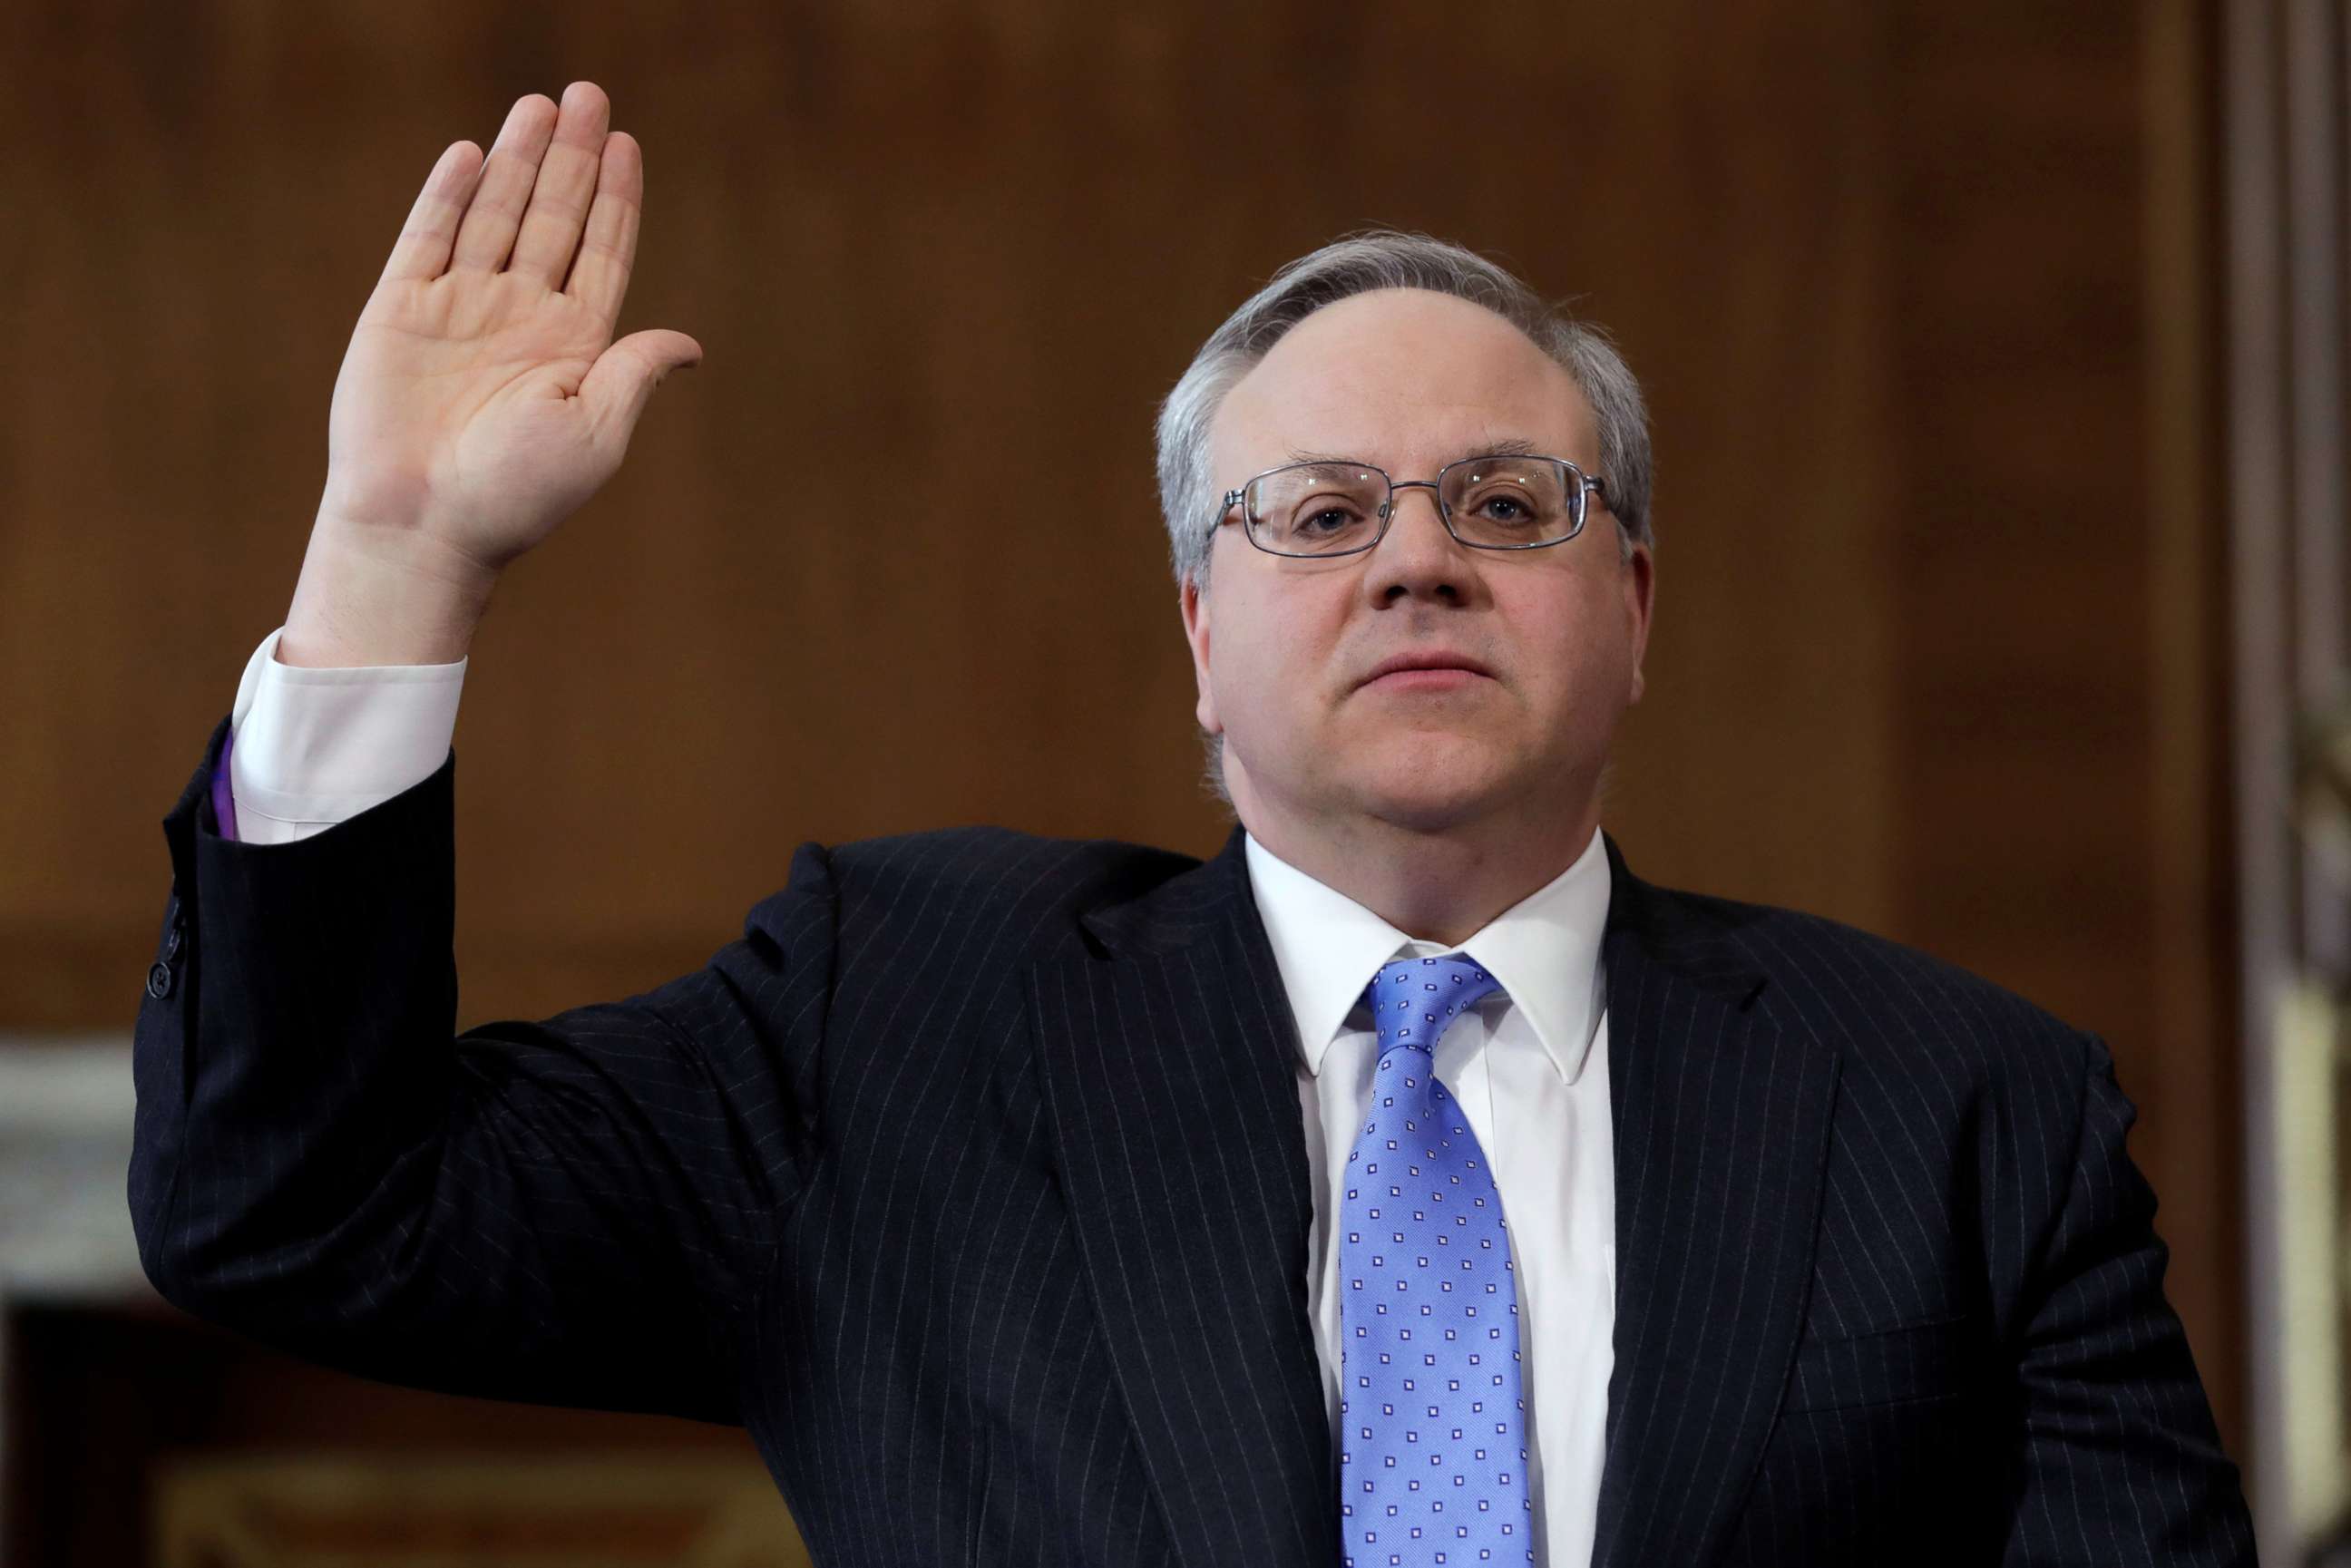 PHOTO: Former energy lobbyist David Bernhardt is sworn in before a Senate Energy and Natural Resources Committee hearing on his nomination of to be Interior secretary, on Capitol Hill in Washington, D.C.,  March 28, 2019.